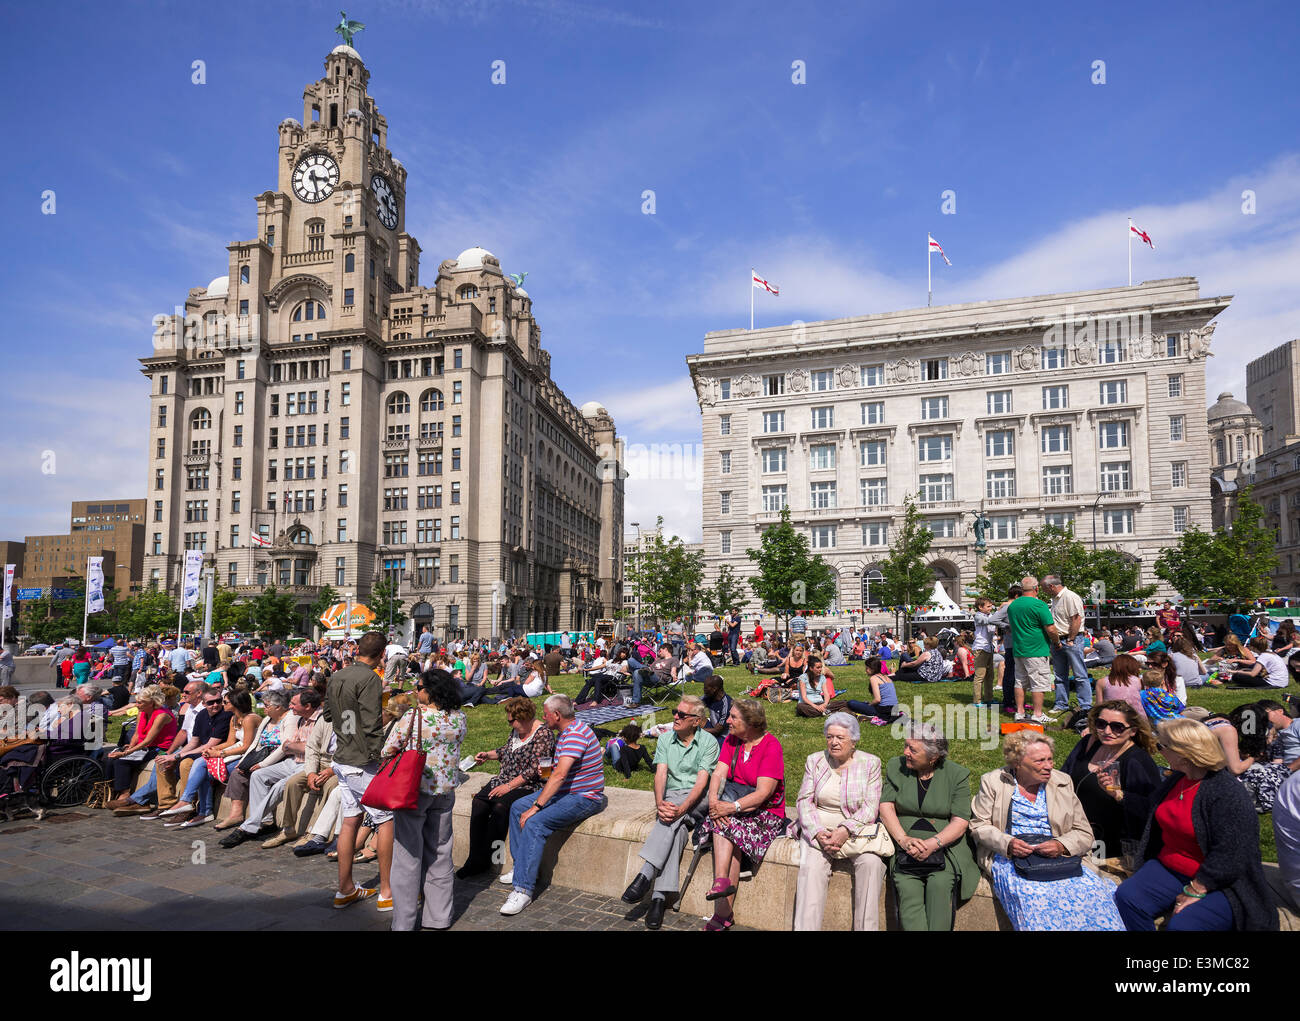 A busy Liverpool pierhead waterfront with the Liver building and Cunard building (right) during the river festival 2014. Stock Photo